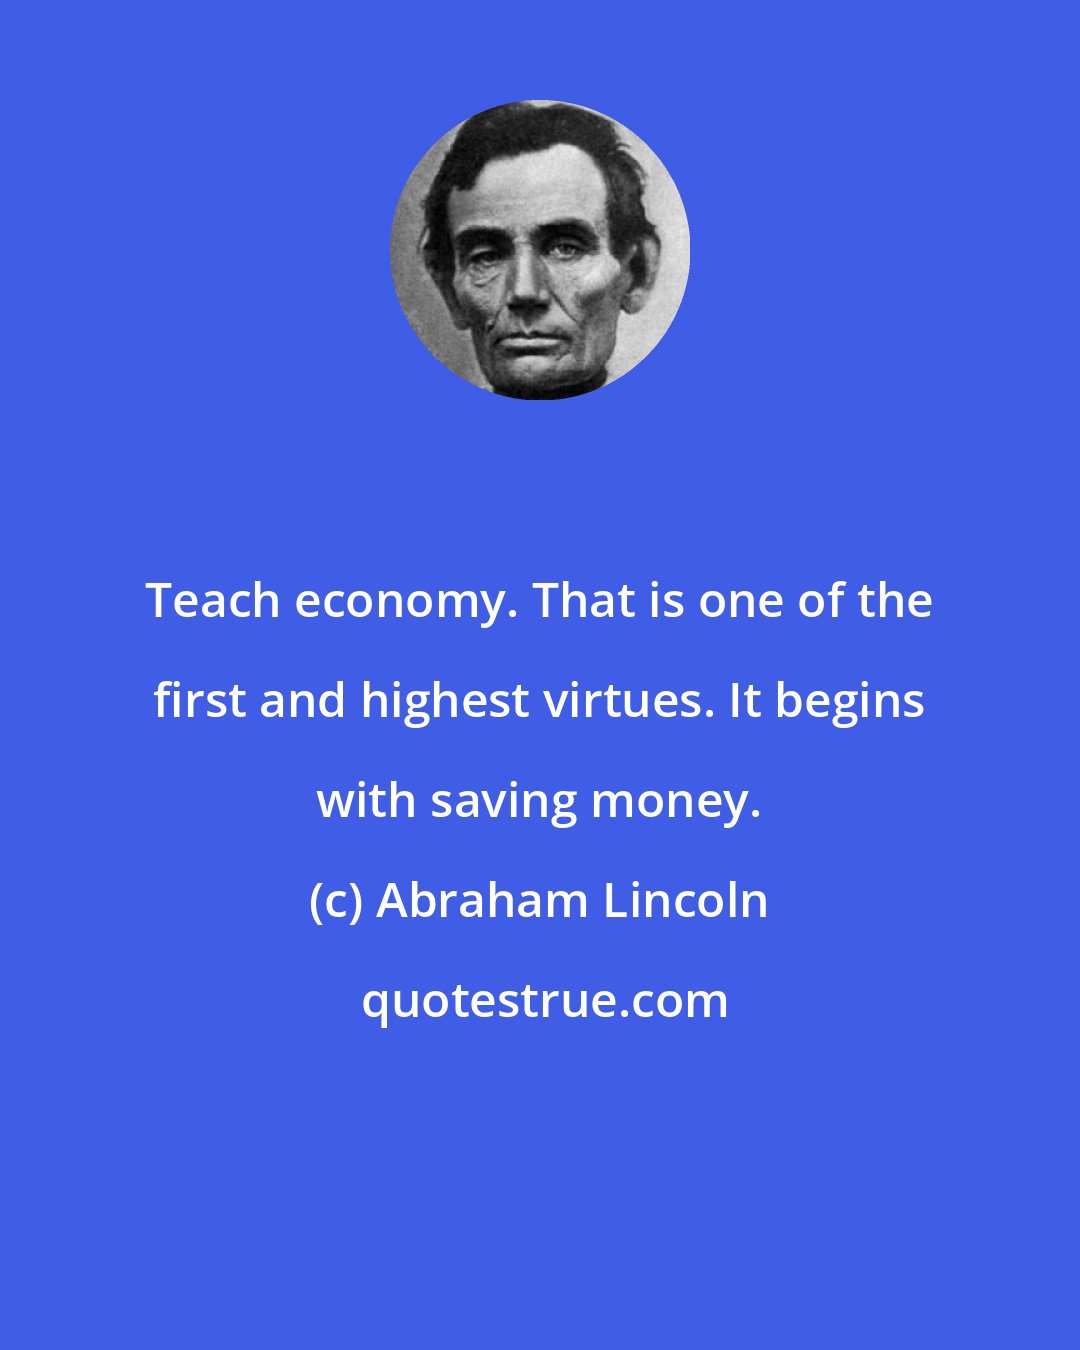 Abraham Lincoln: Teach economy. That is one of the first and highest virtues. It begins with saving money.